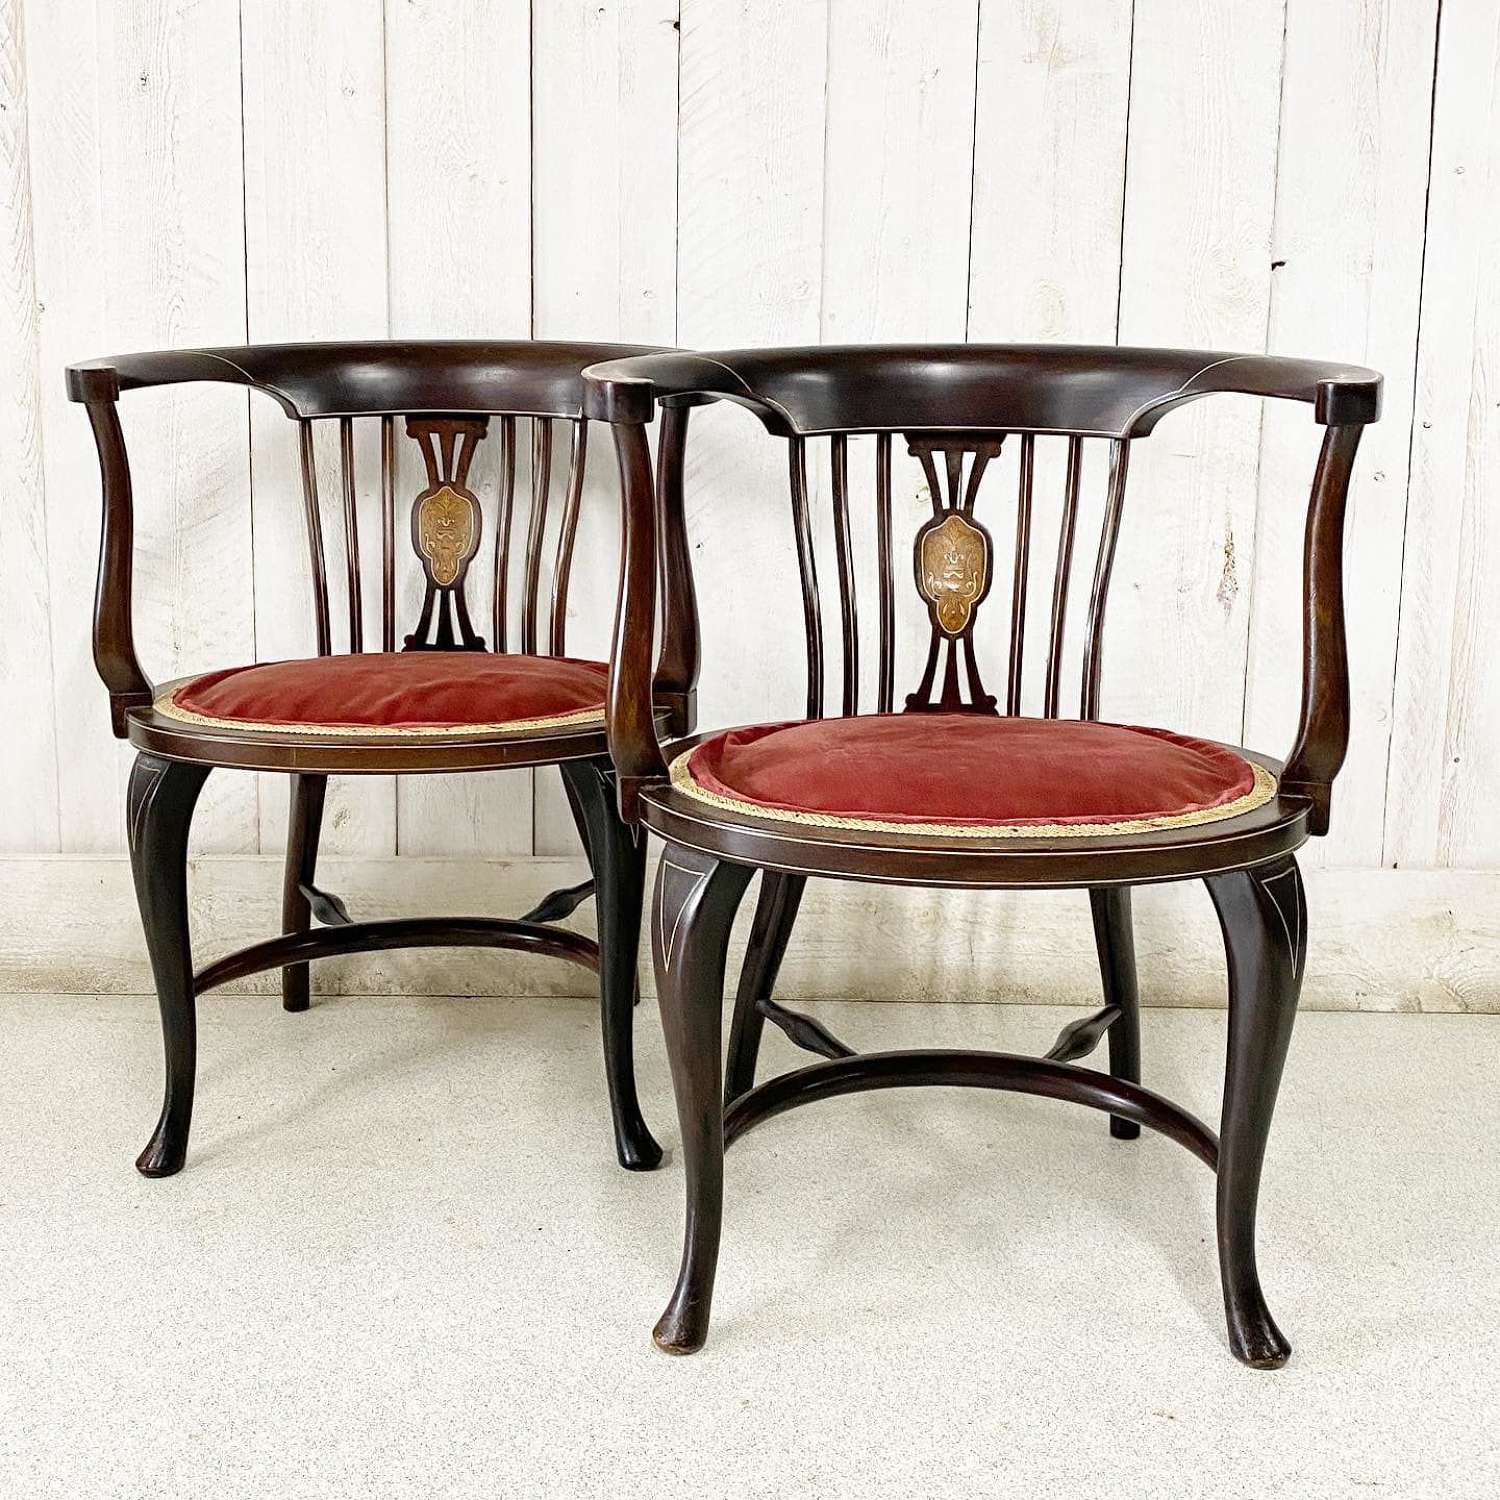 Pair of Edwardian Tub Chairs